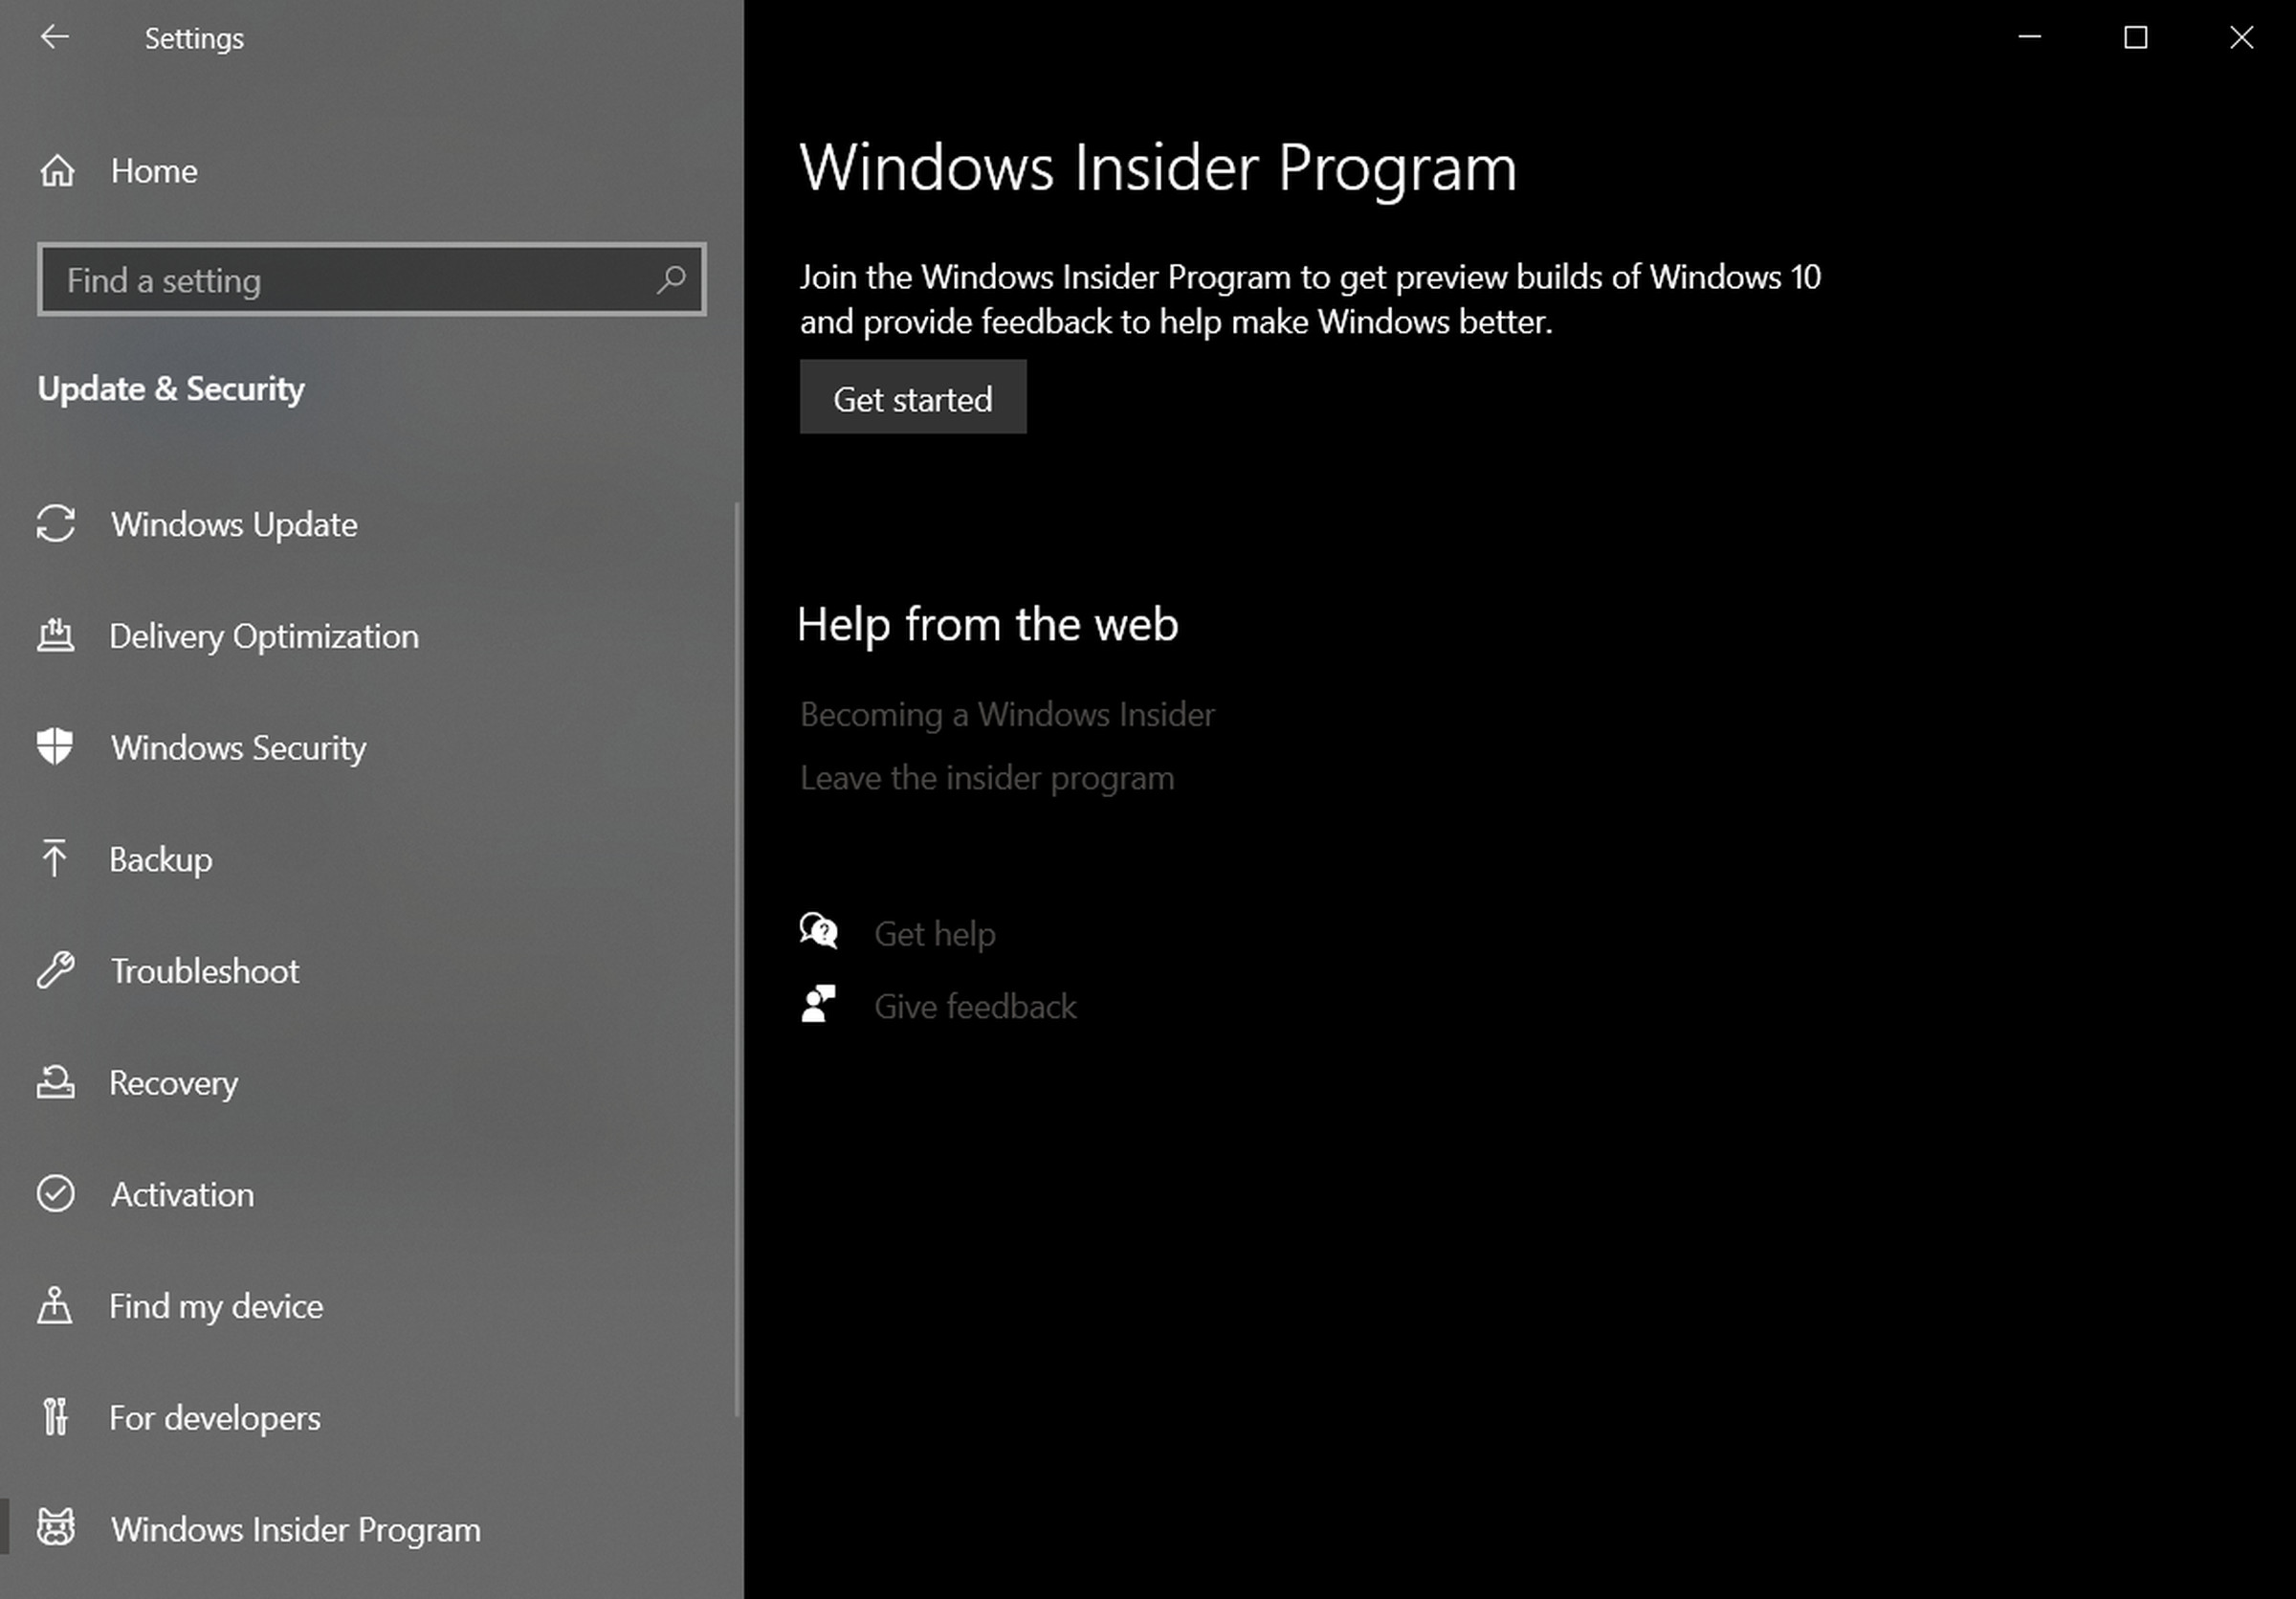 The Windows Insider section in Windows 10.